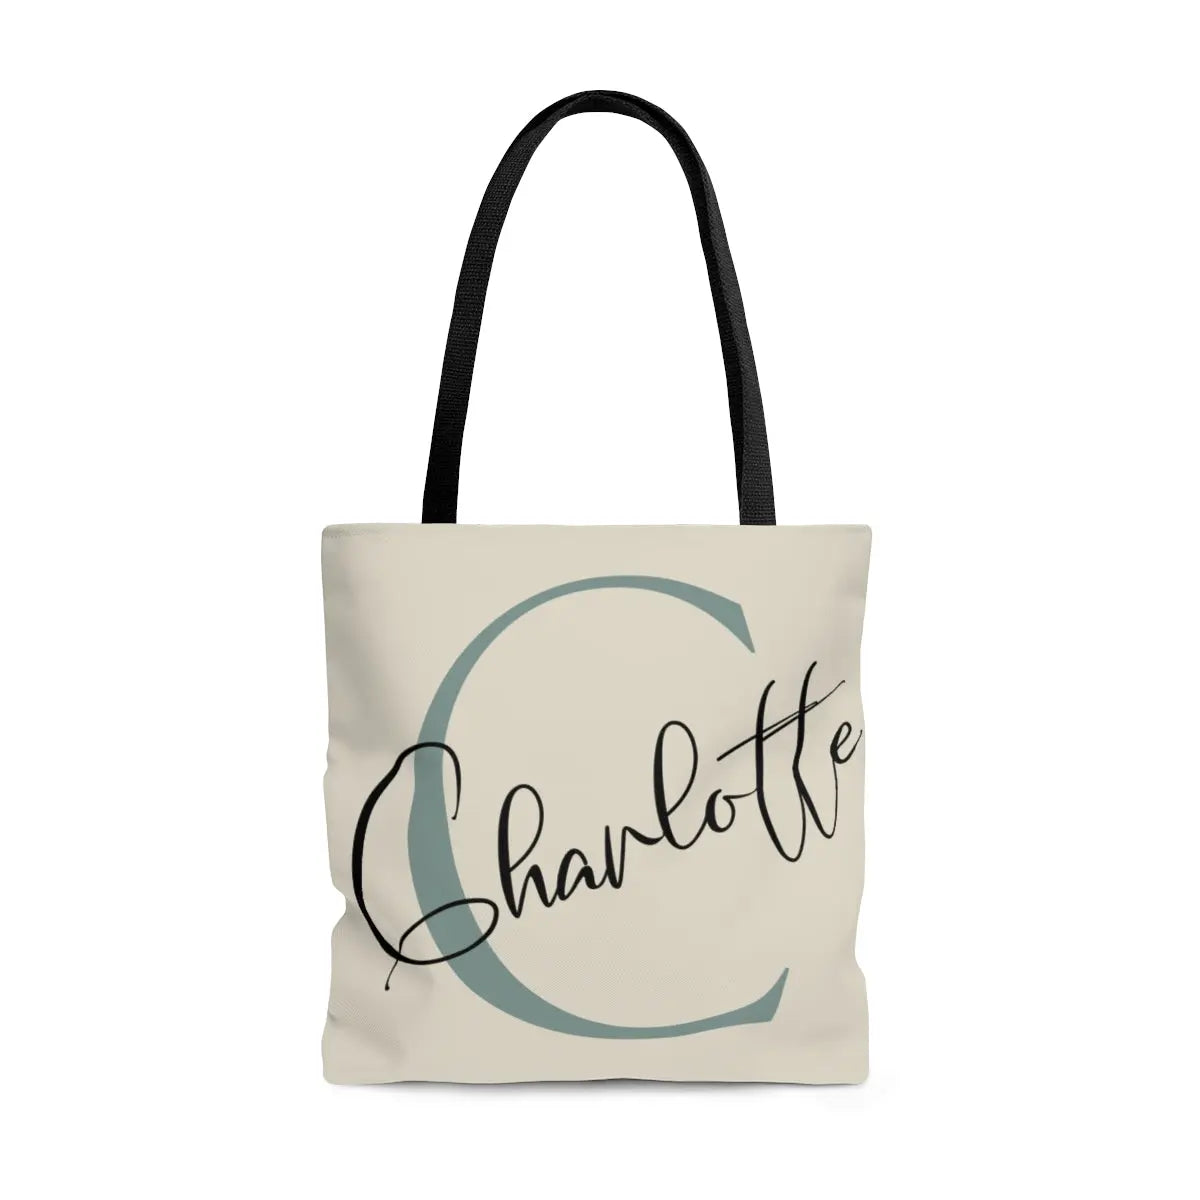 Bridal Party Gift Monogram Tote Bag Wedding Party Tote Bags 